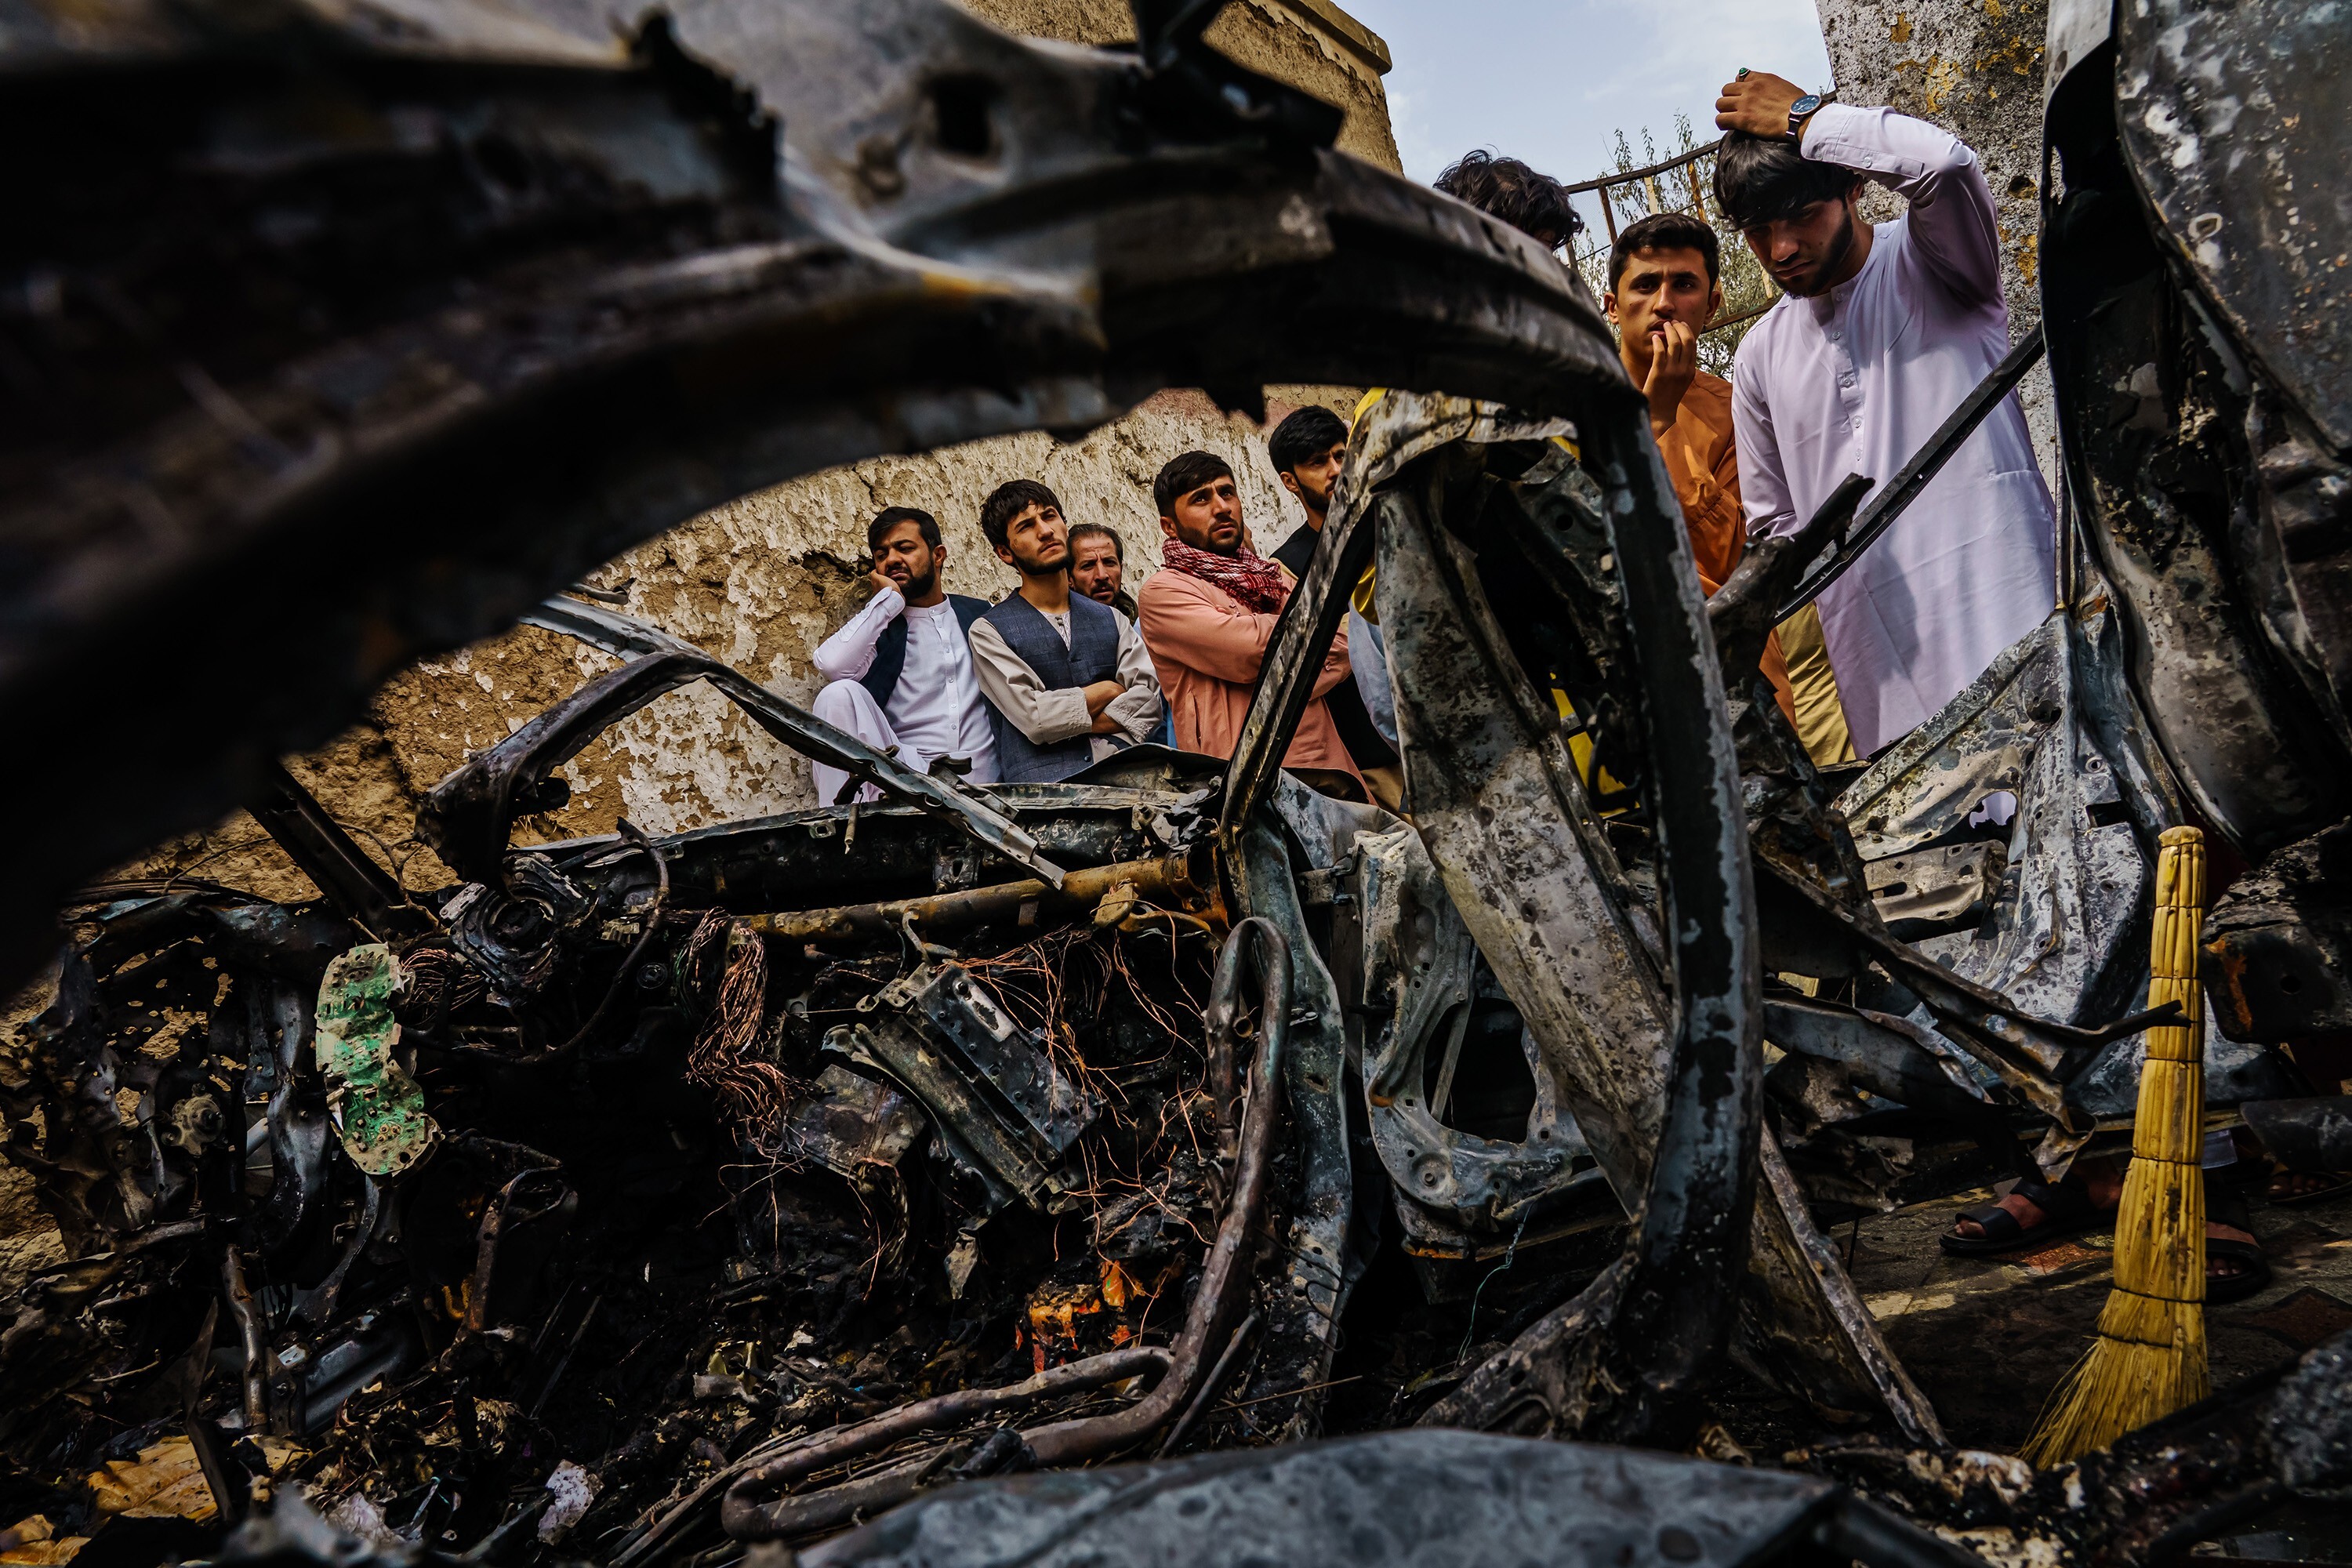 Relatives and neighbours of the Ahmadi family gather around the incinerated husk of a vehicle that was hit by a US drone strike in Kabul, Afghanistan. Photo: LA Times